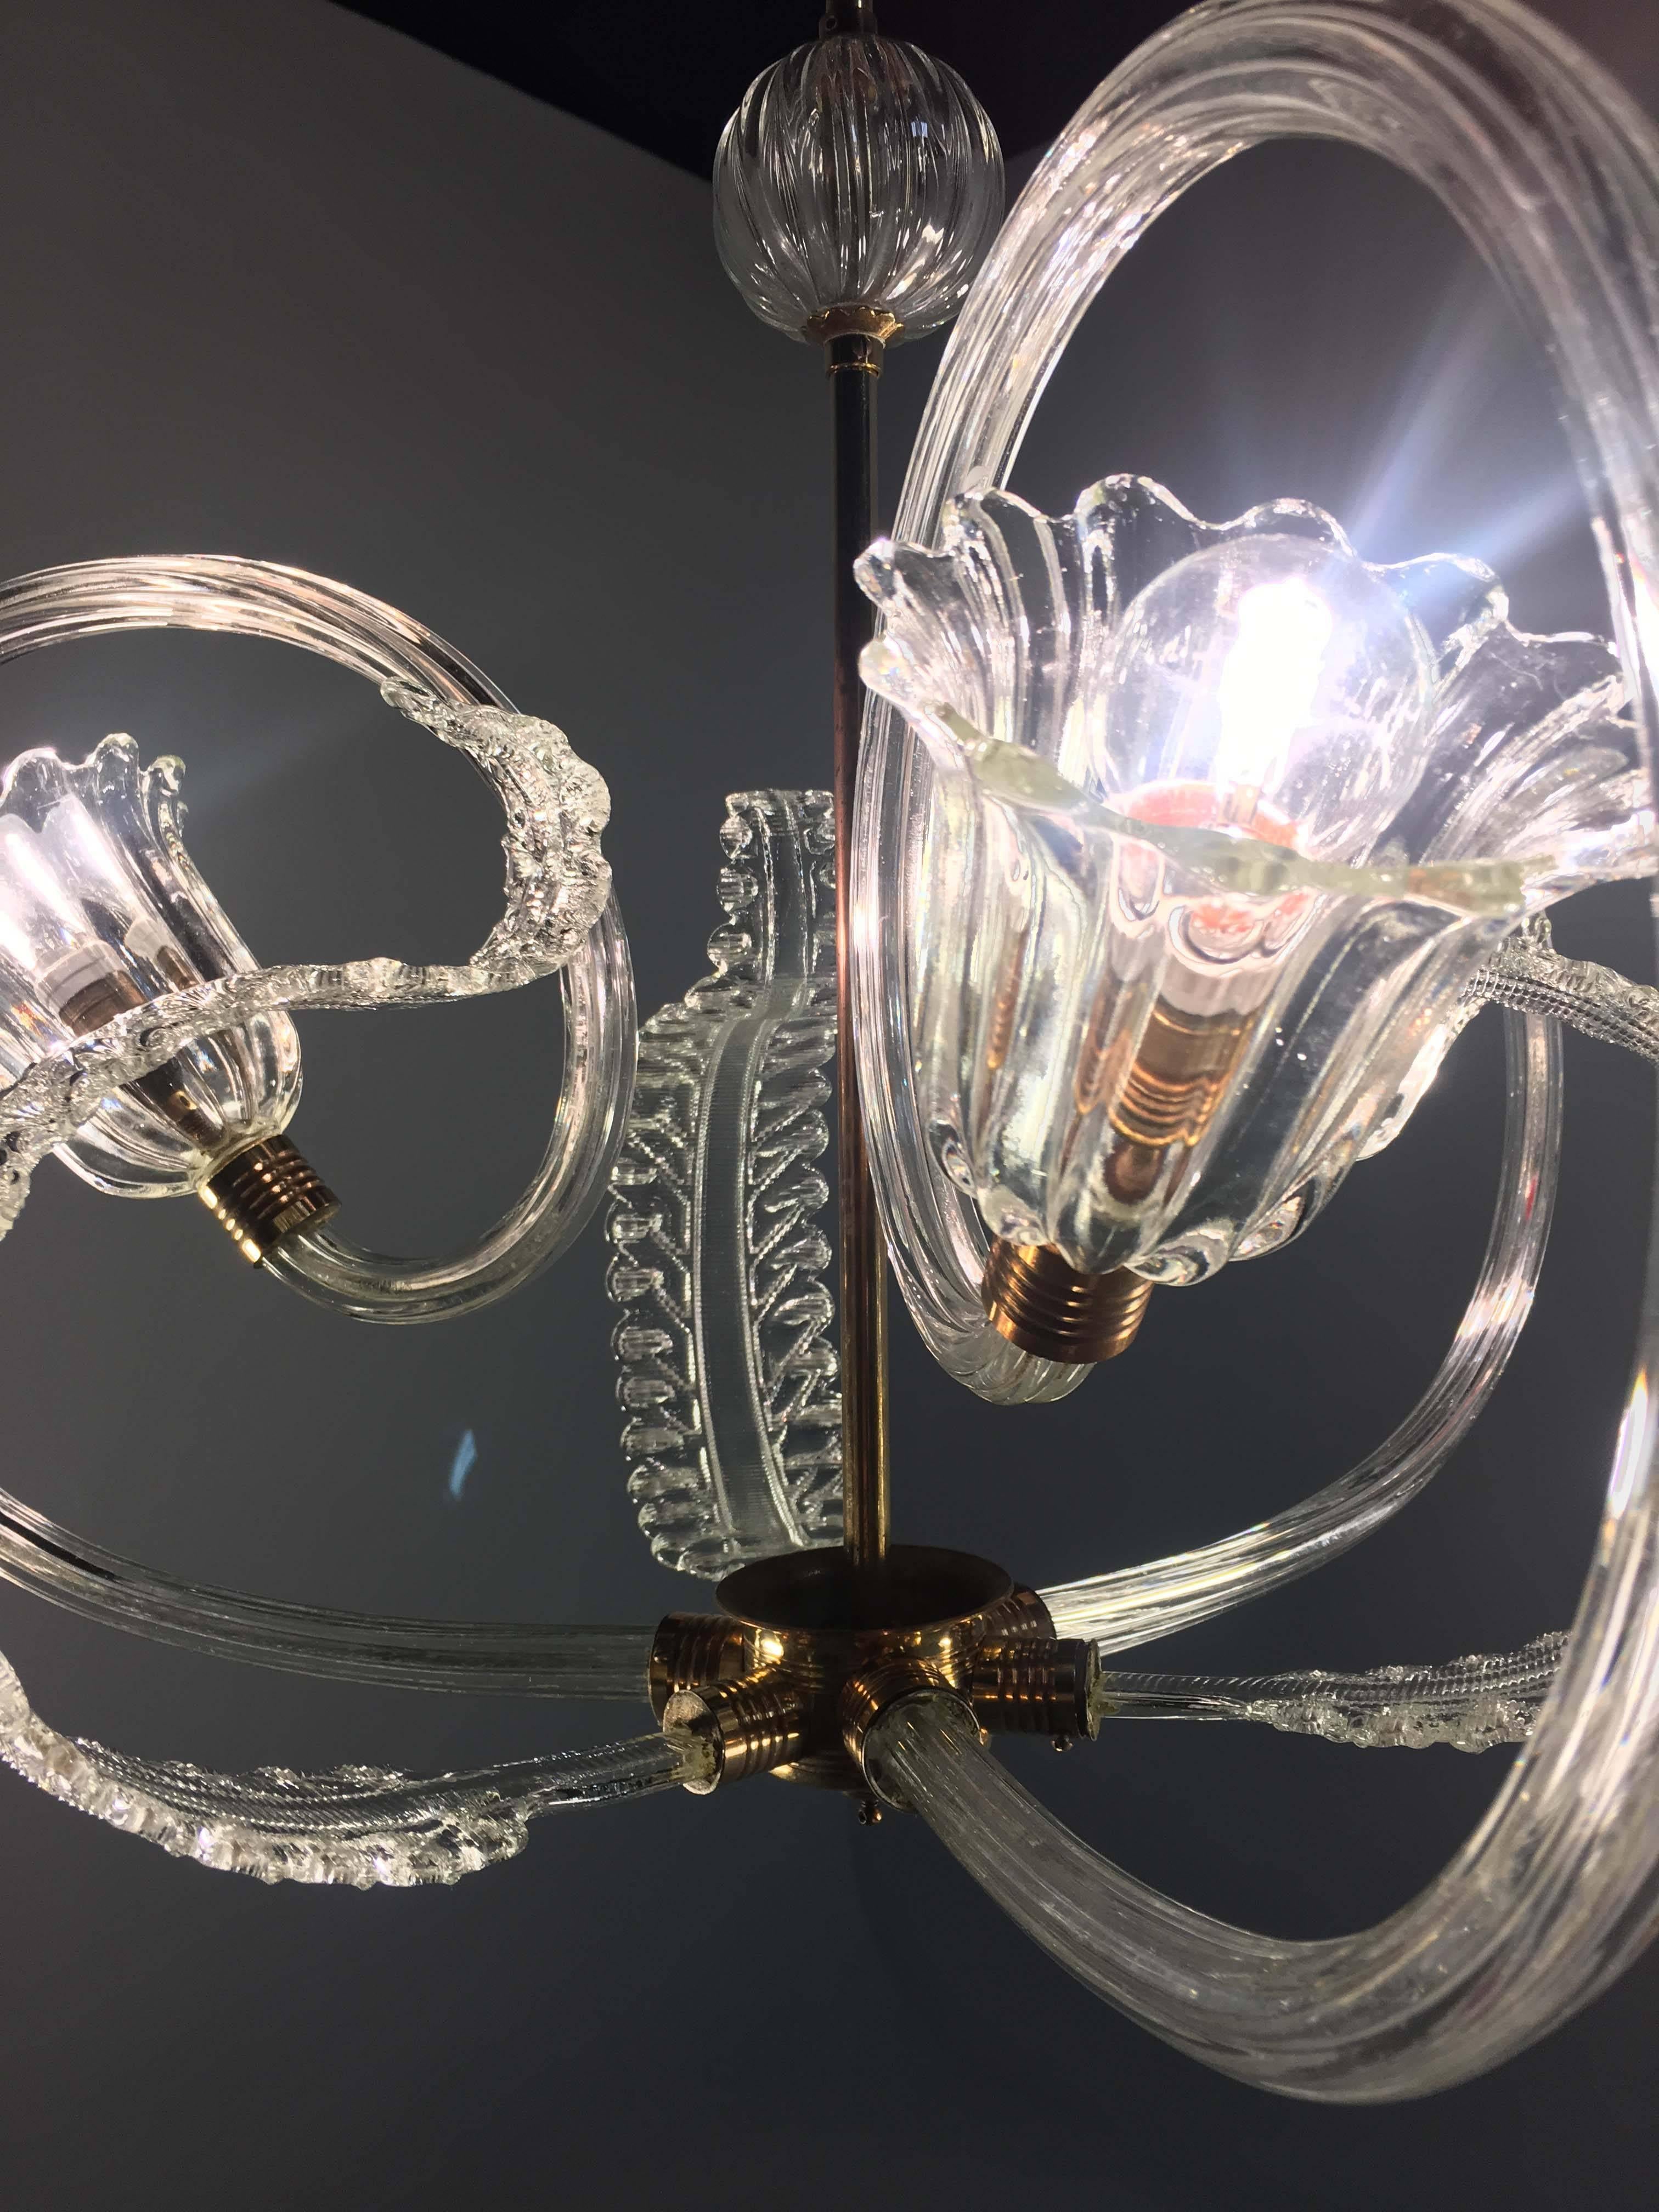 Charming Italian Chandelier by Barovier & Toso, Murano, 1940 For Sale 7